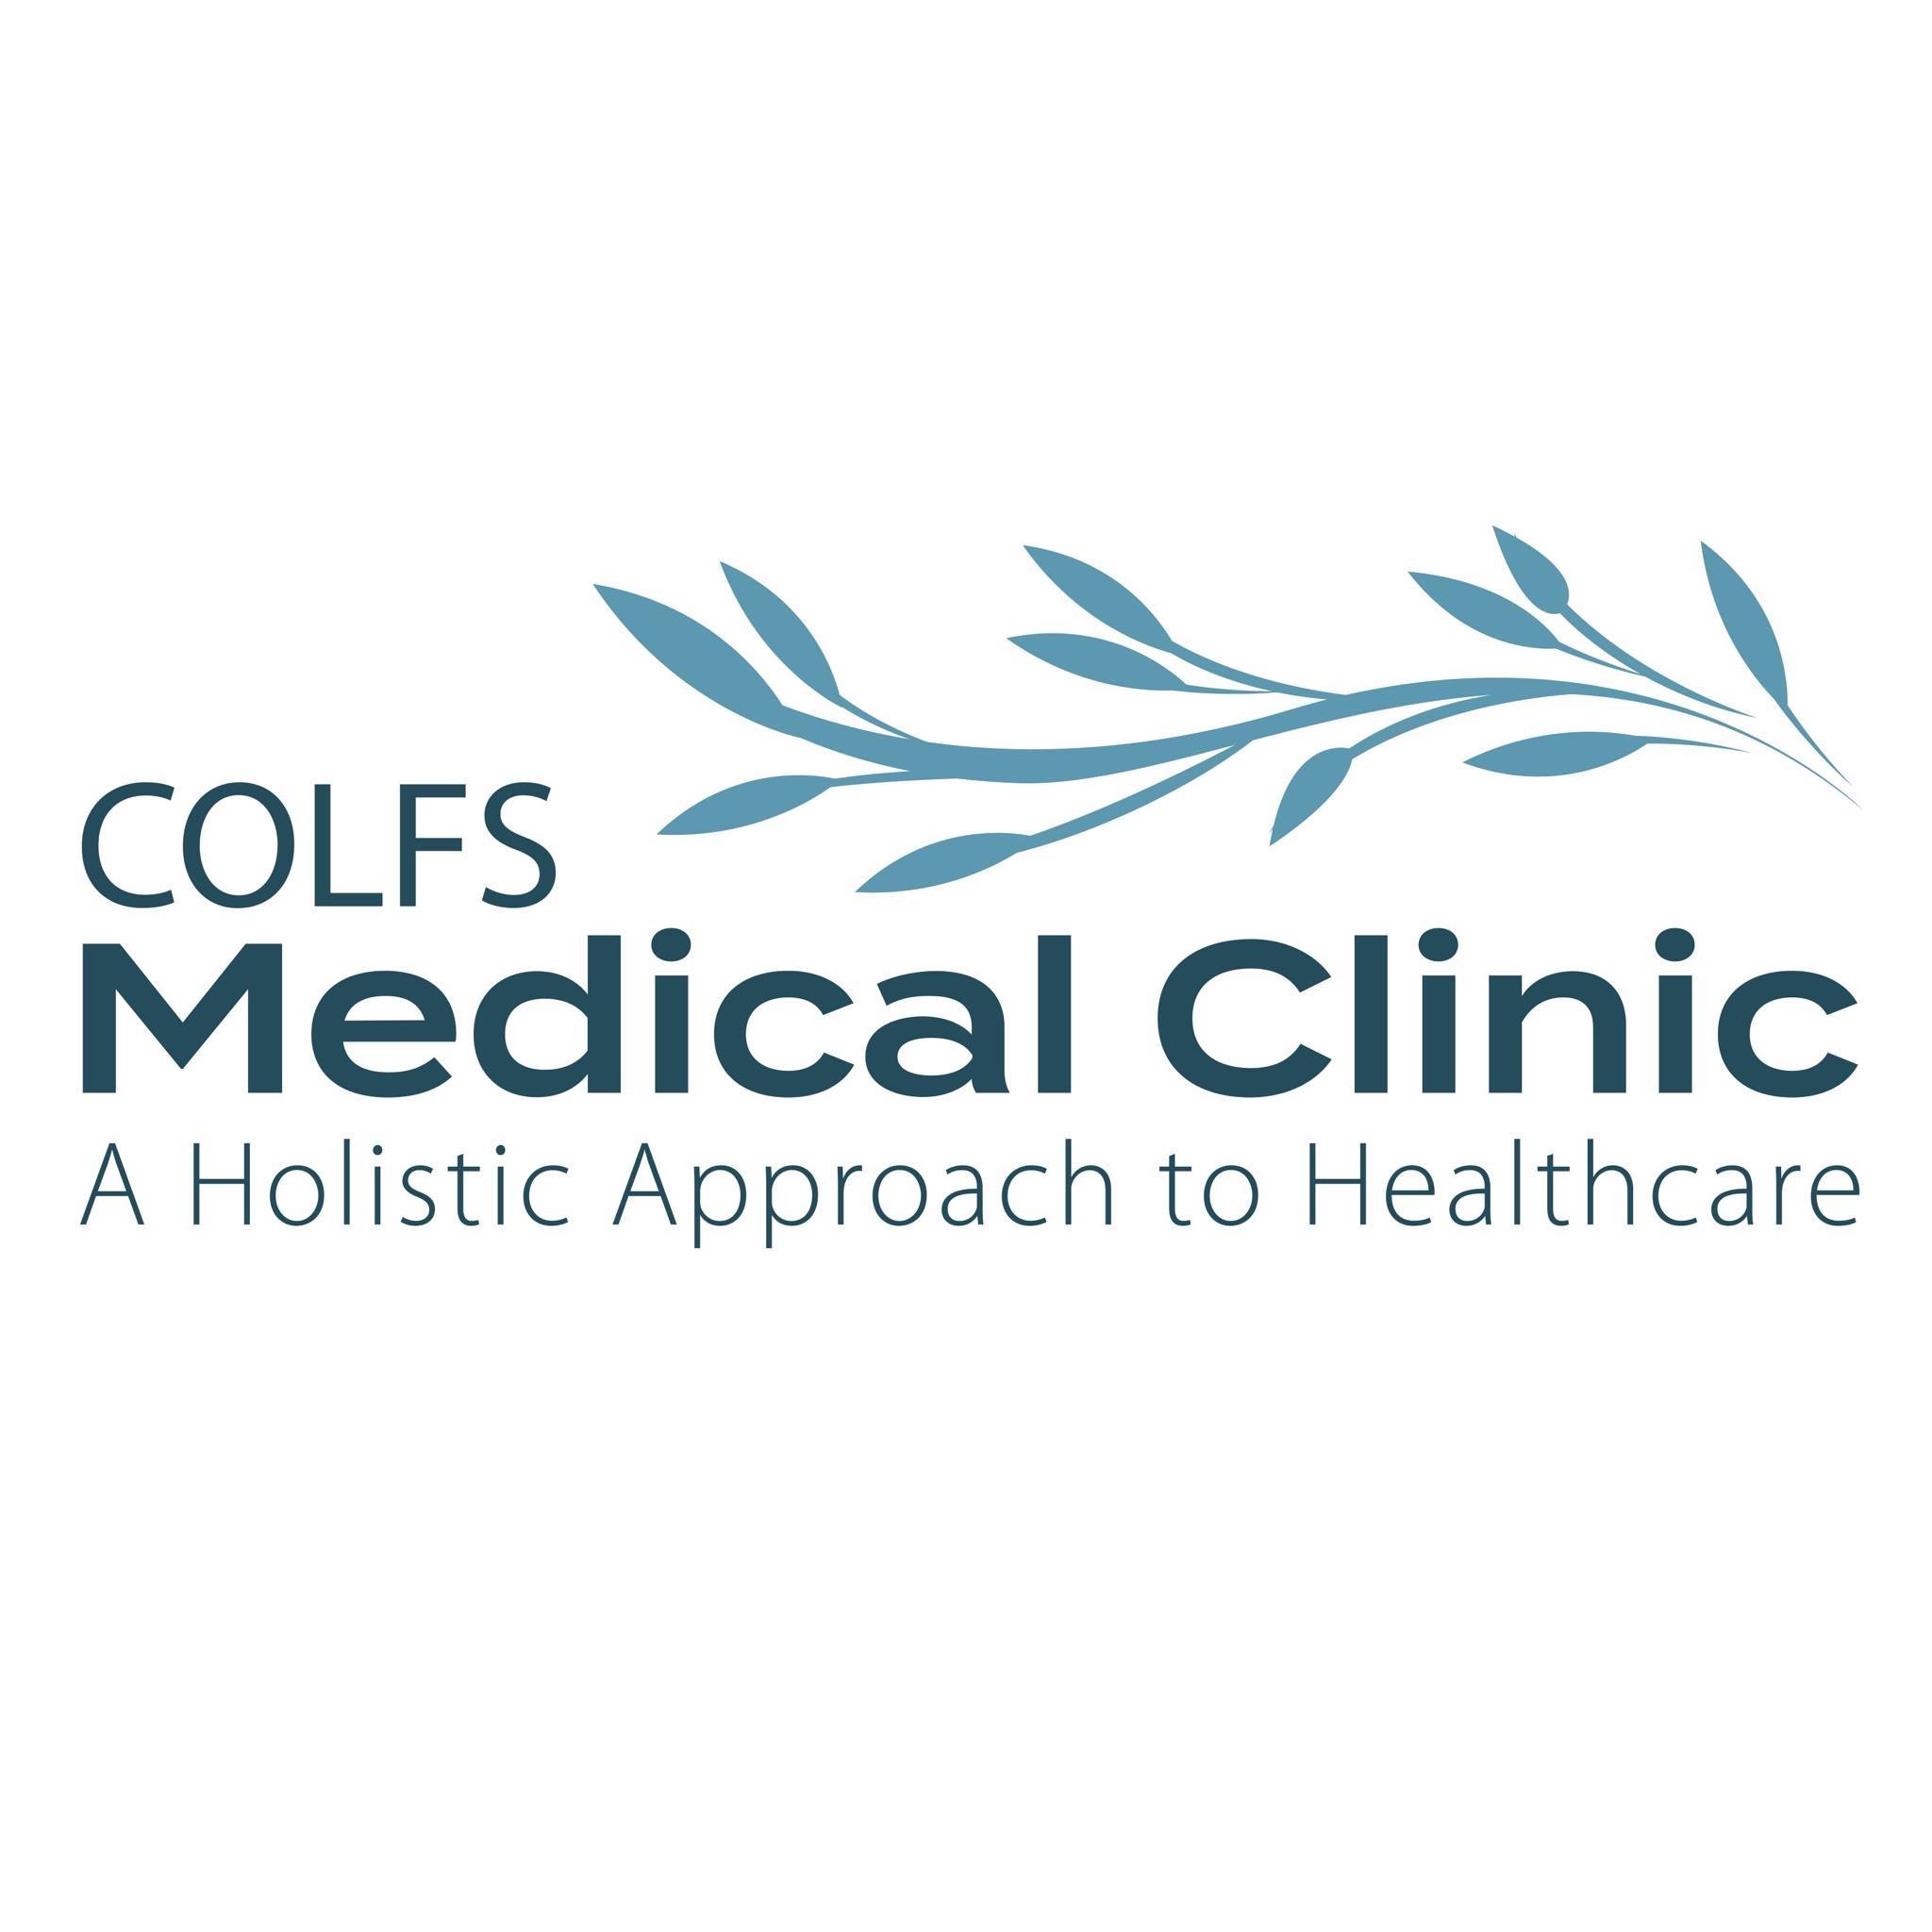 COLFS Medical Clinic on Fifth Avenue